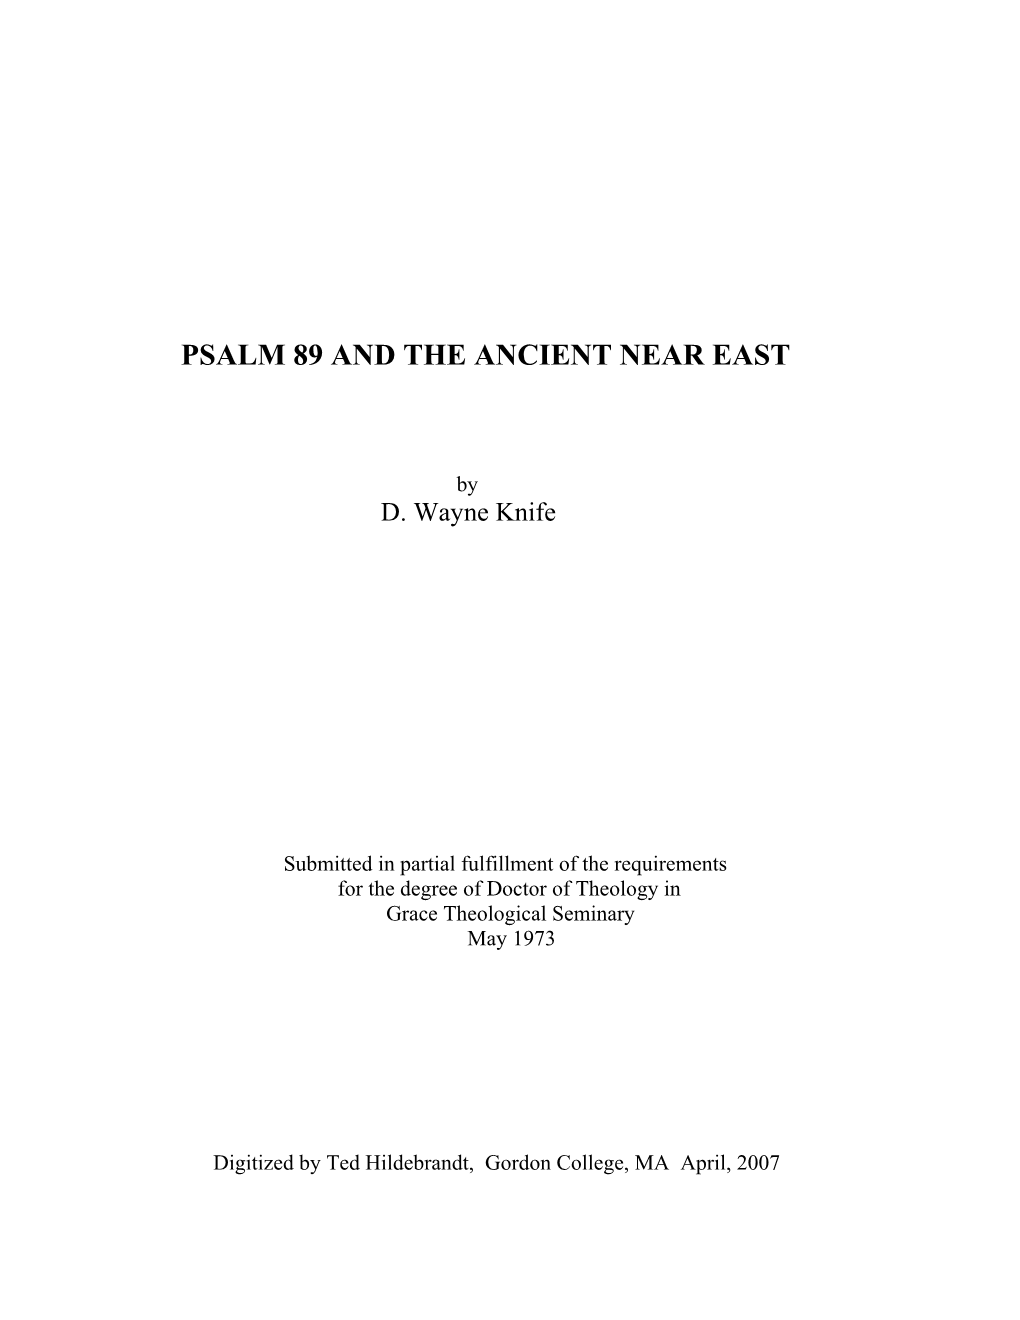 Psalm 89 and the Ancient Near East